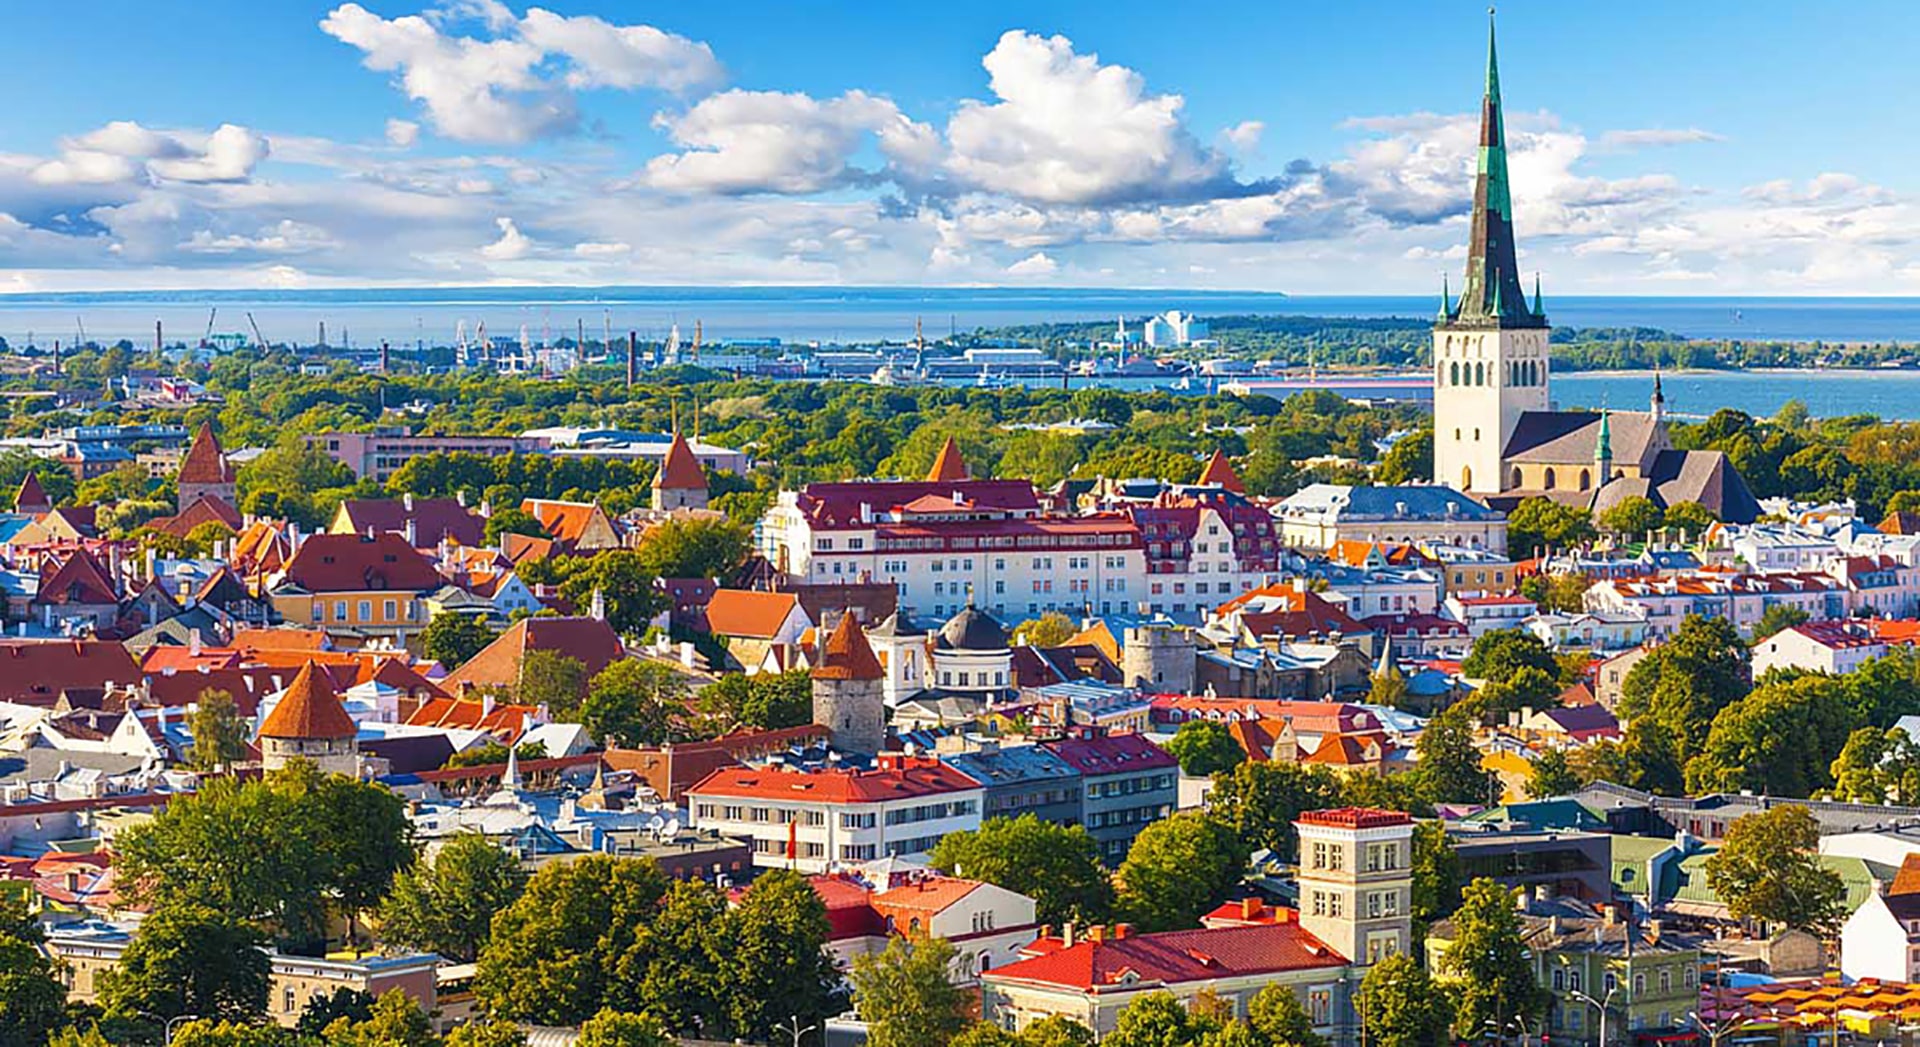 Legal services and legal protection of business in Estonia